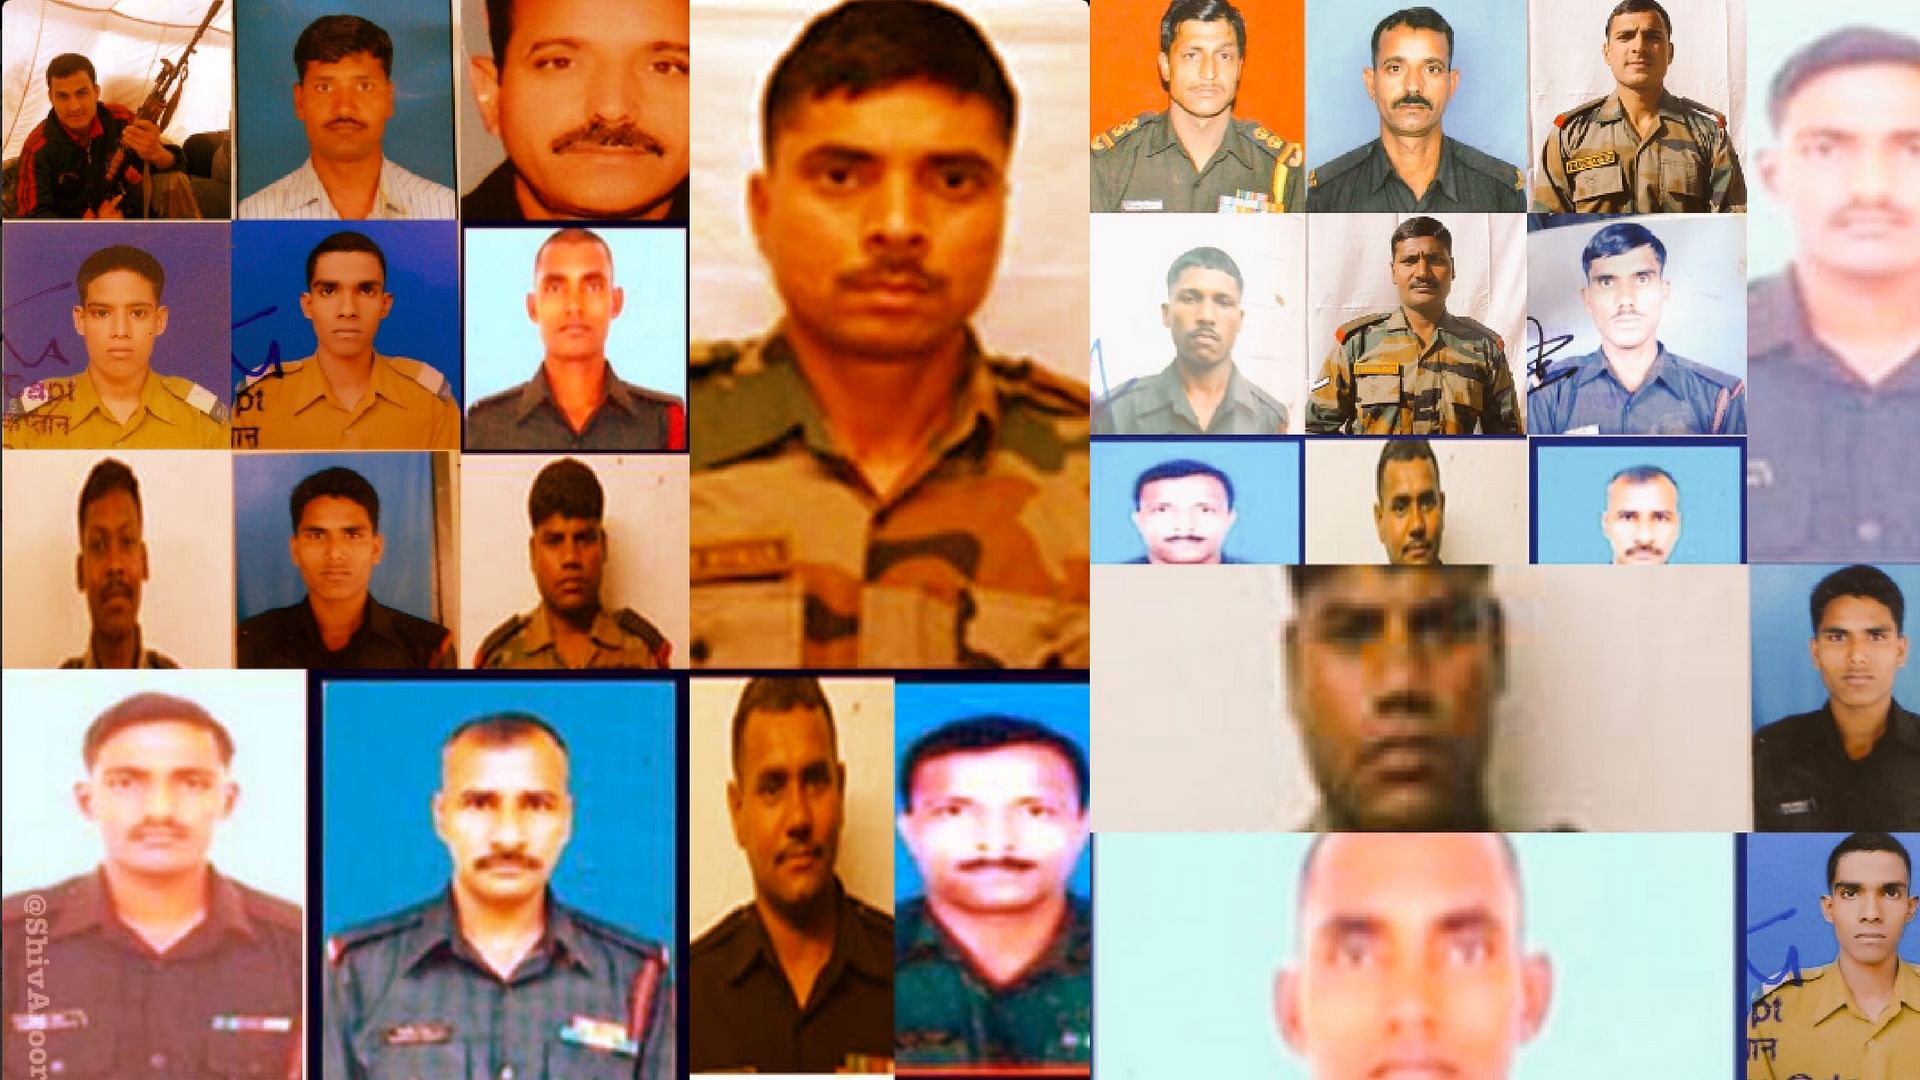 18 soldiers were killed in an attack on an Indian army base on 18 September 2016.